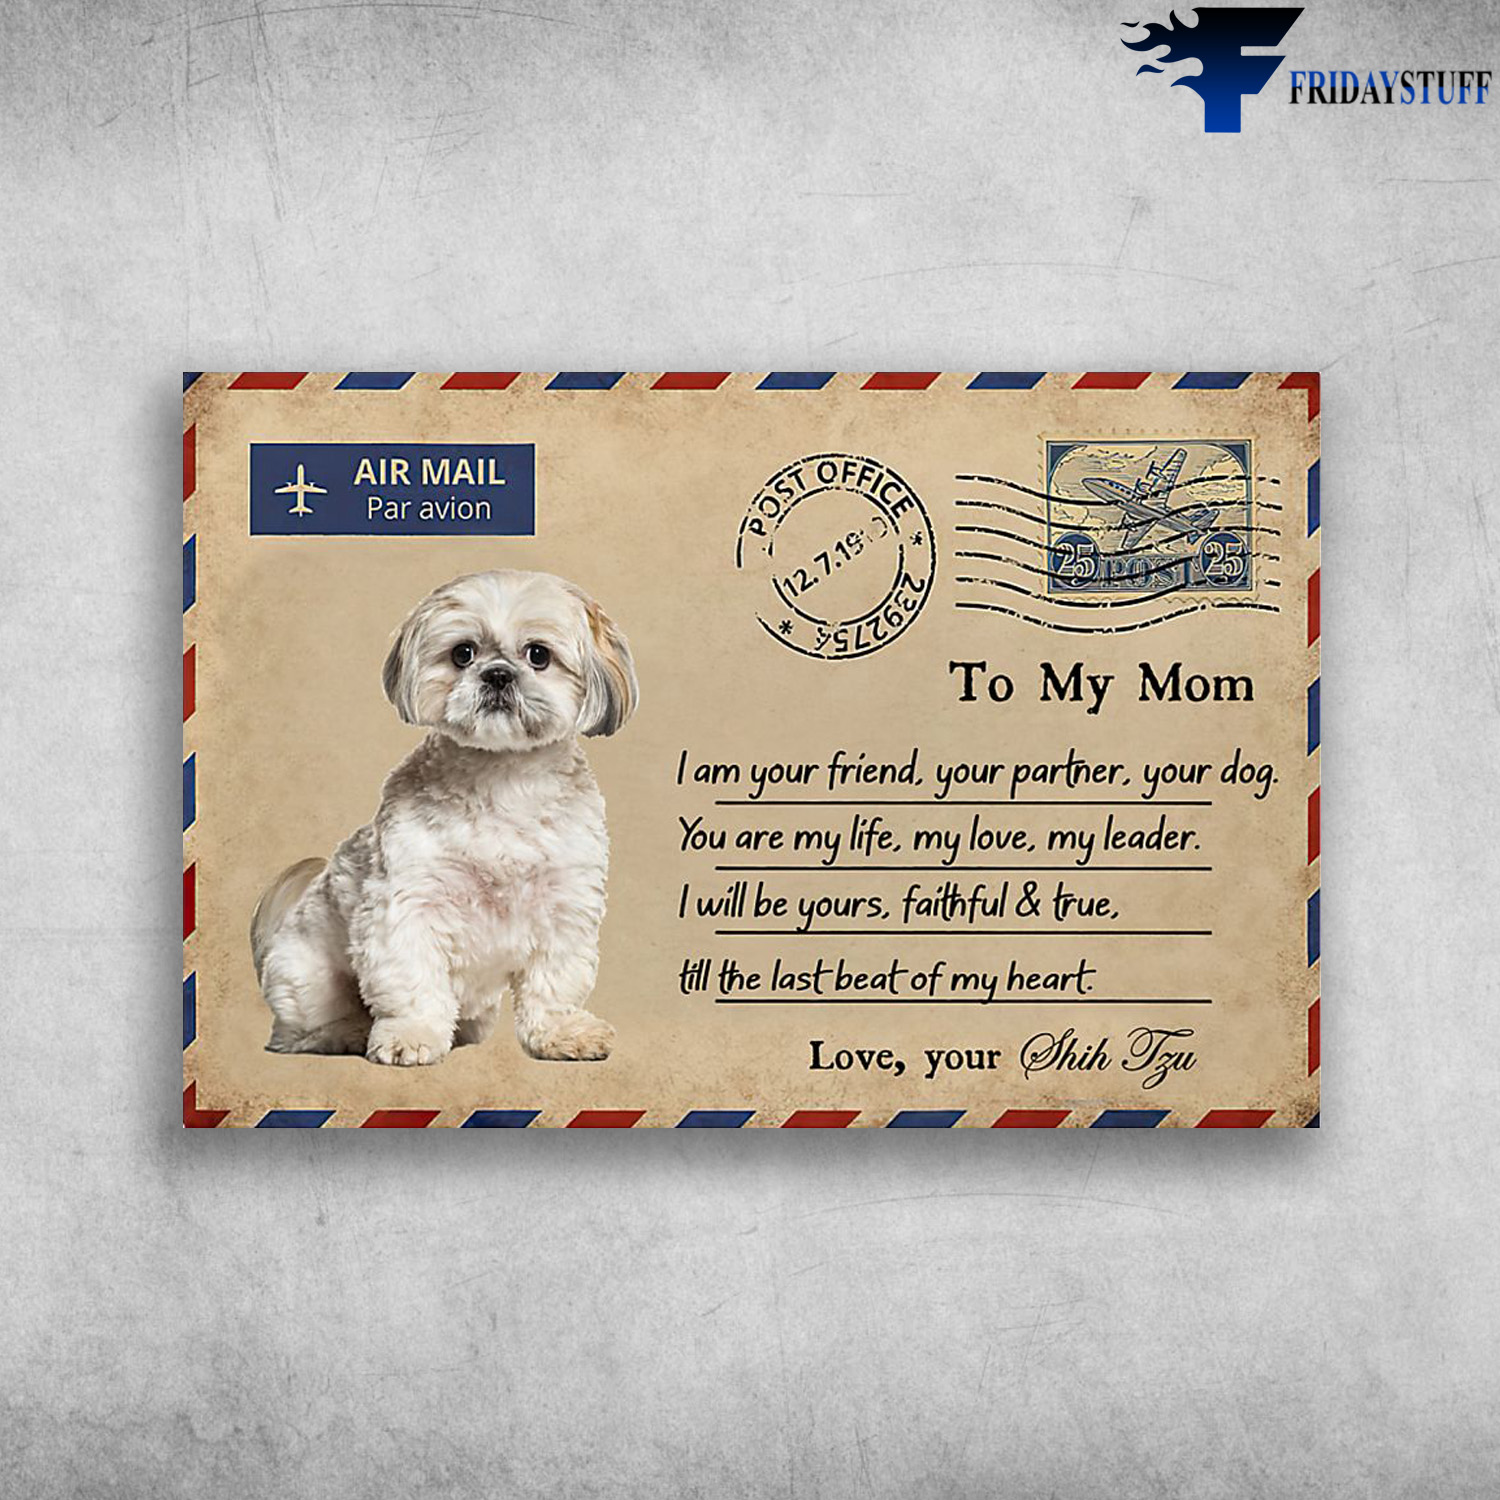 Shih Tzu Dog - Air Mail PAr Avion, To My Mom, I Am Your Friend, Your Partner, Your Dog, You Are My Life, My Love, My Leader, I Will Be Yours, Faithful And True, Till The Last Beat Of My Heart, Love, Your Shih Tzu